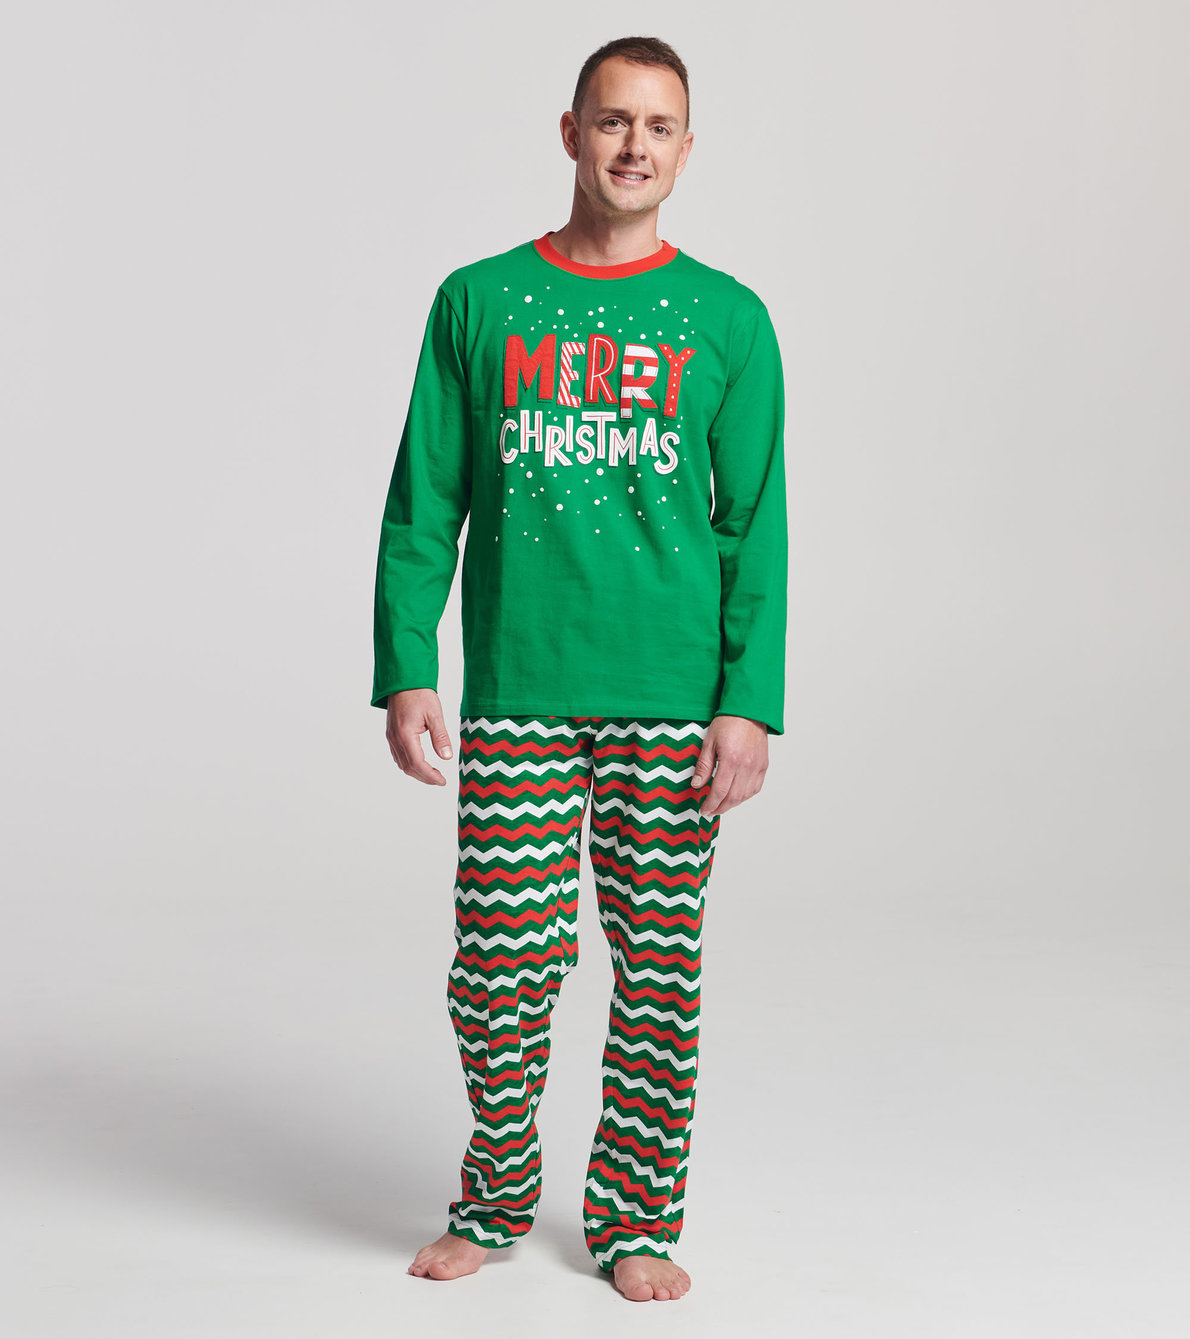 View larger image of Merry Christmas Men's Tee and Pants Pajama Separates